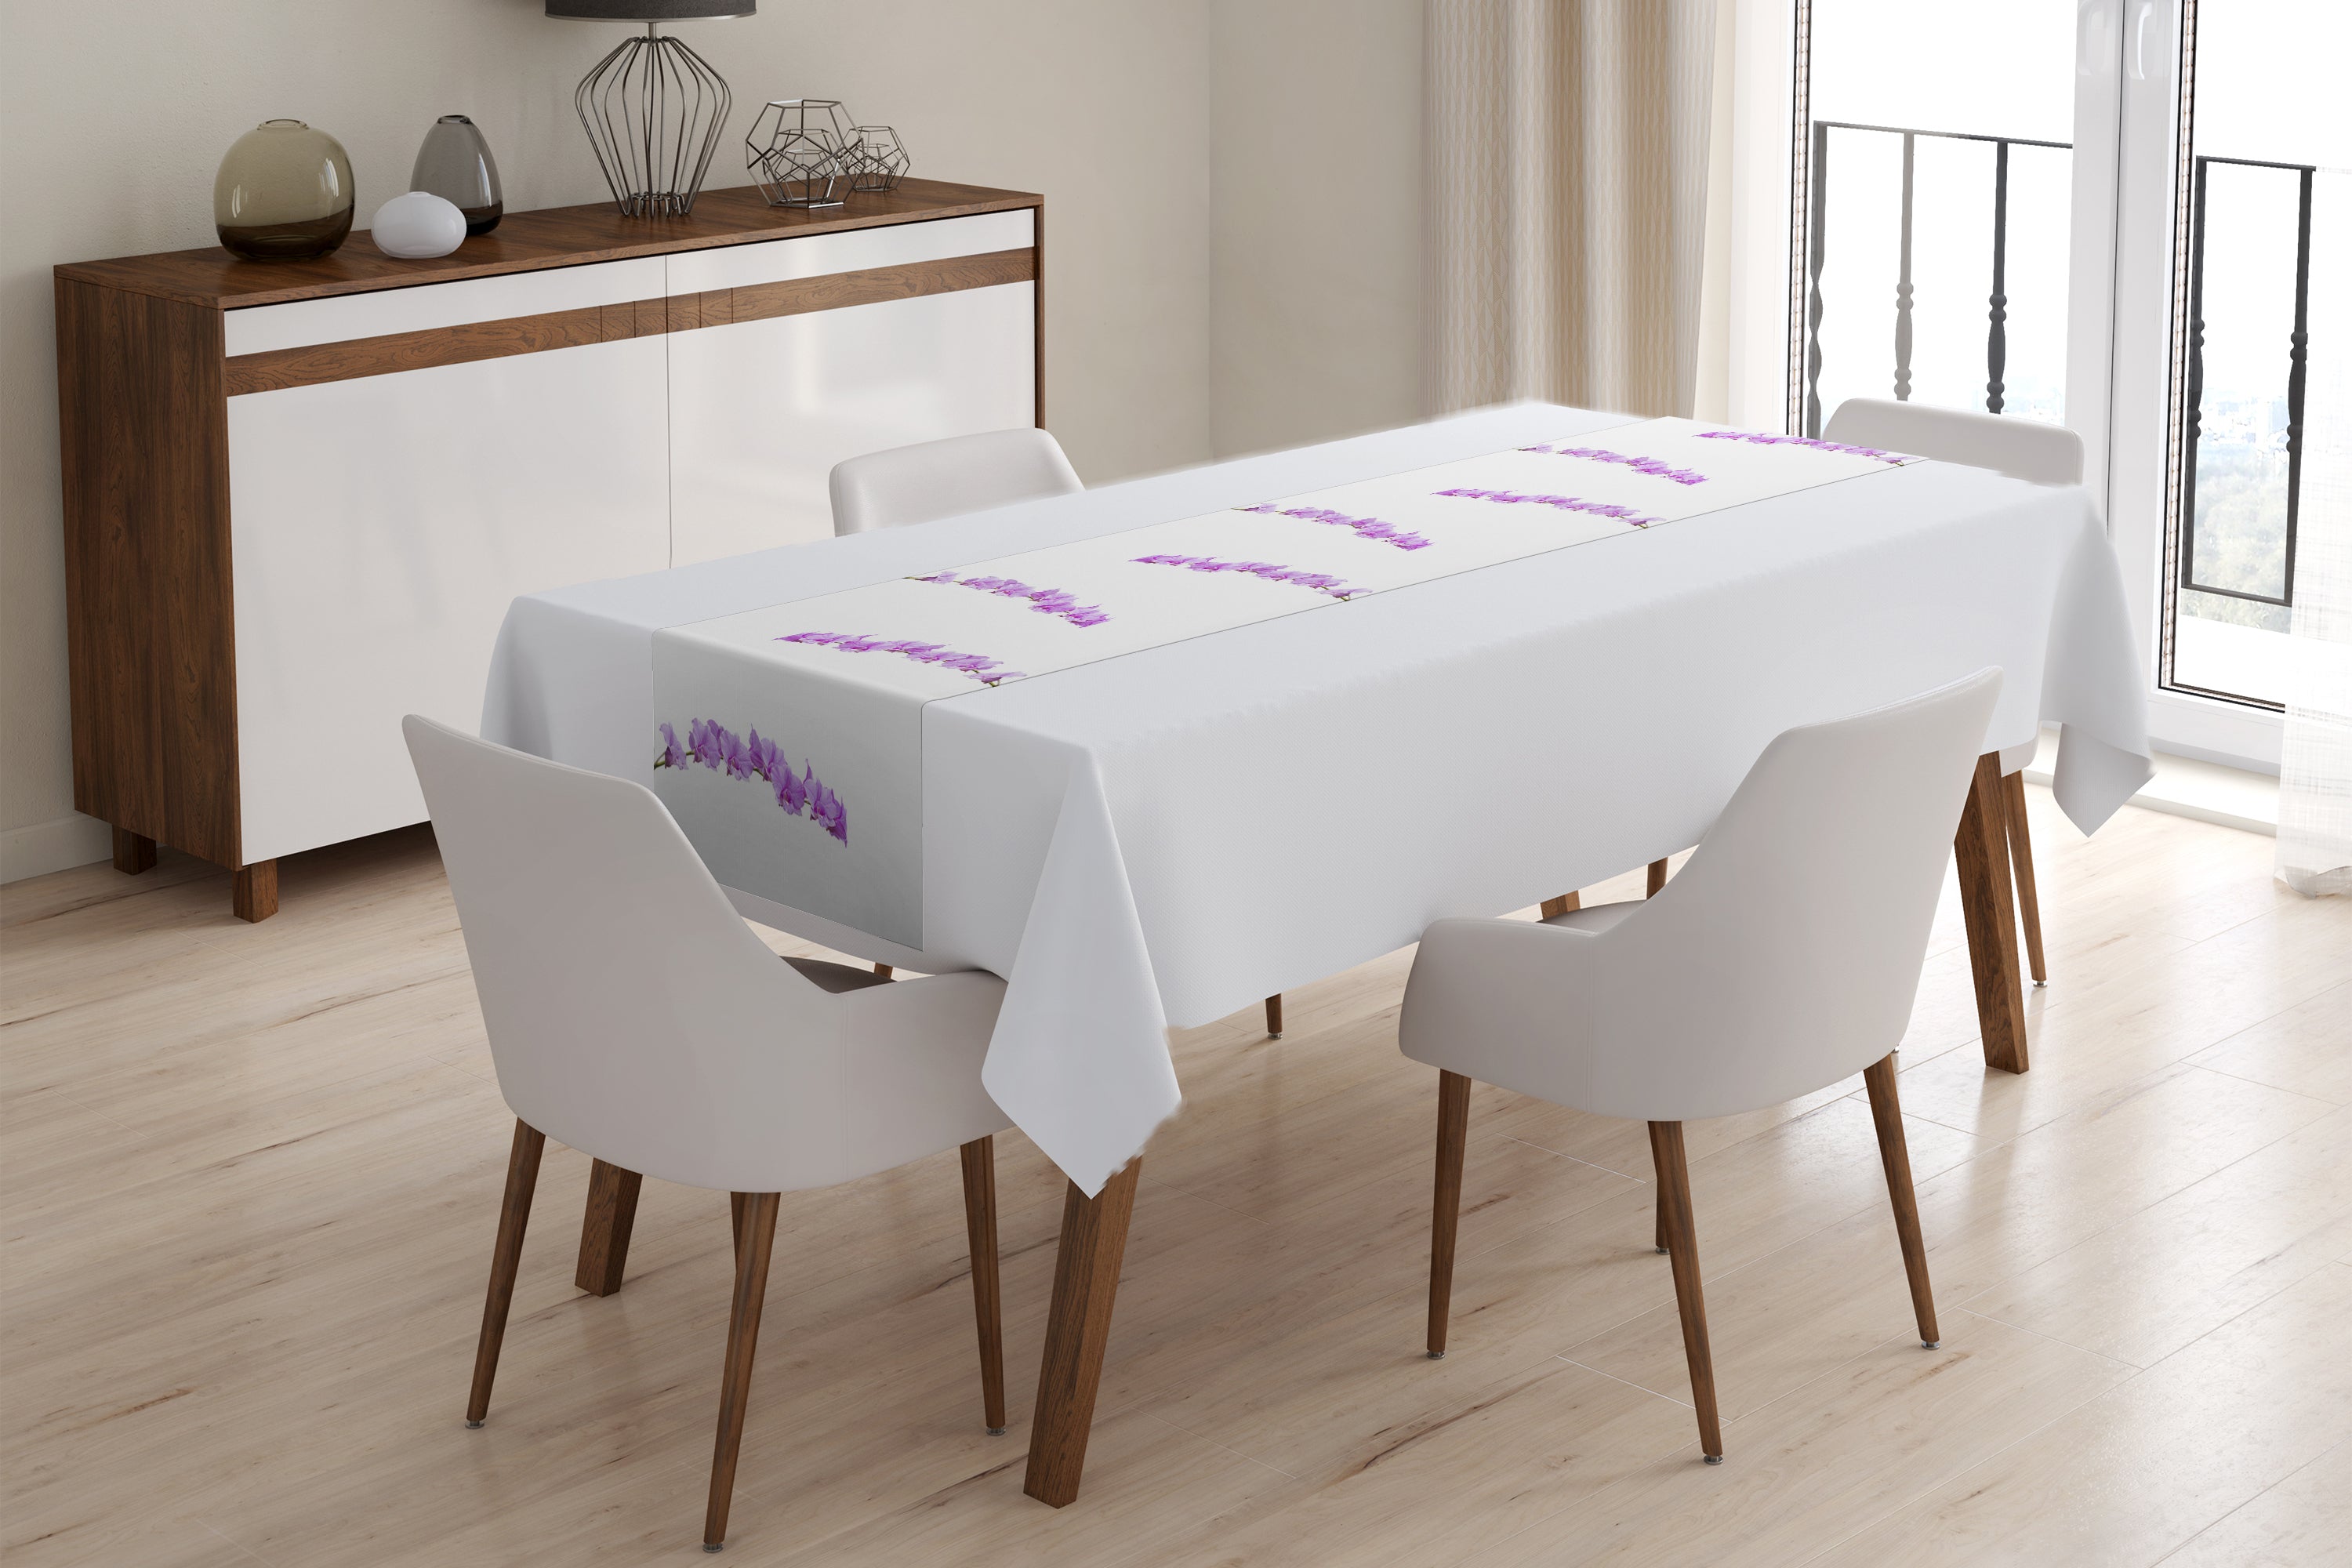 Table Runner Awesome Lilac Orchids - Wellmira